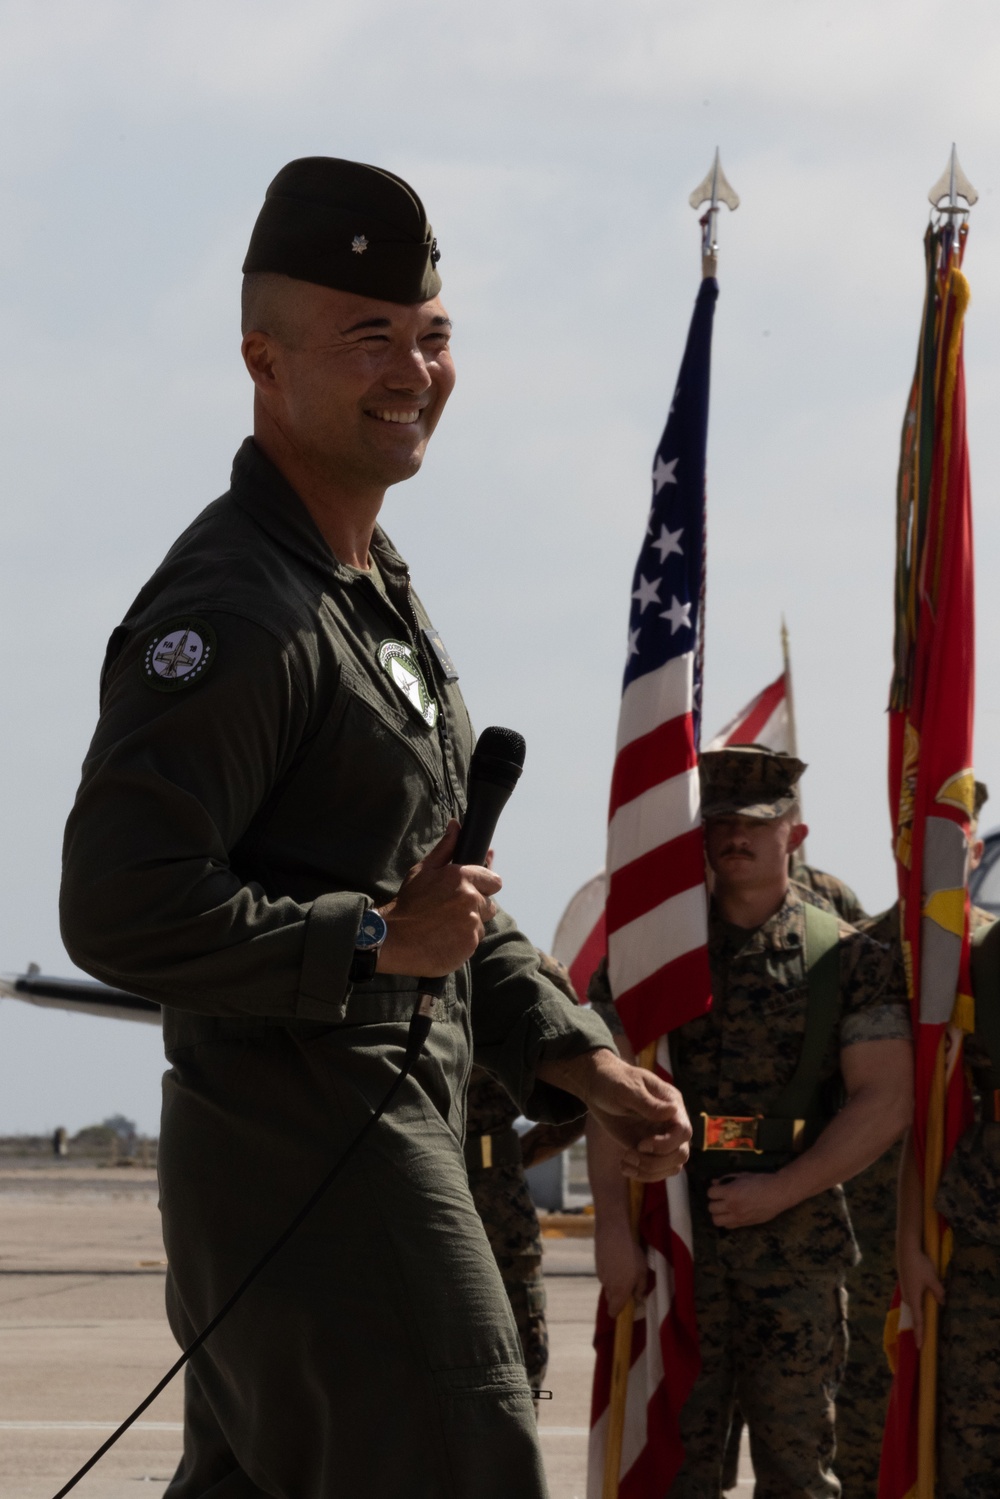 VMFAT-101 Fly the Barn and Deactivation Ceremony 